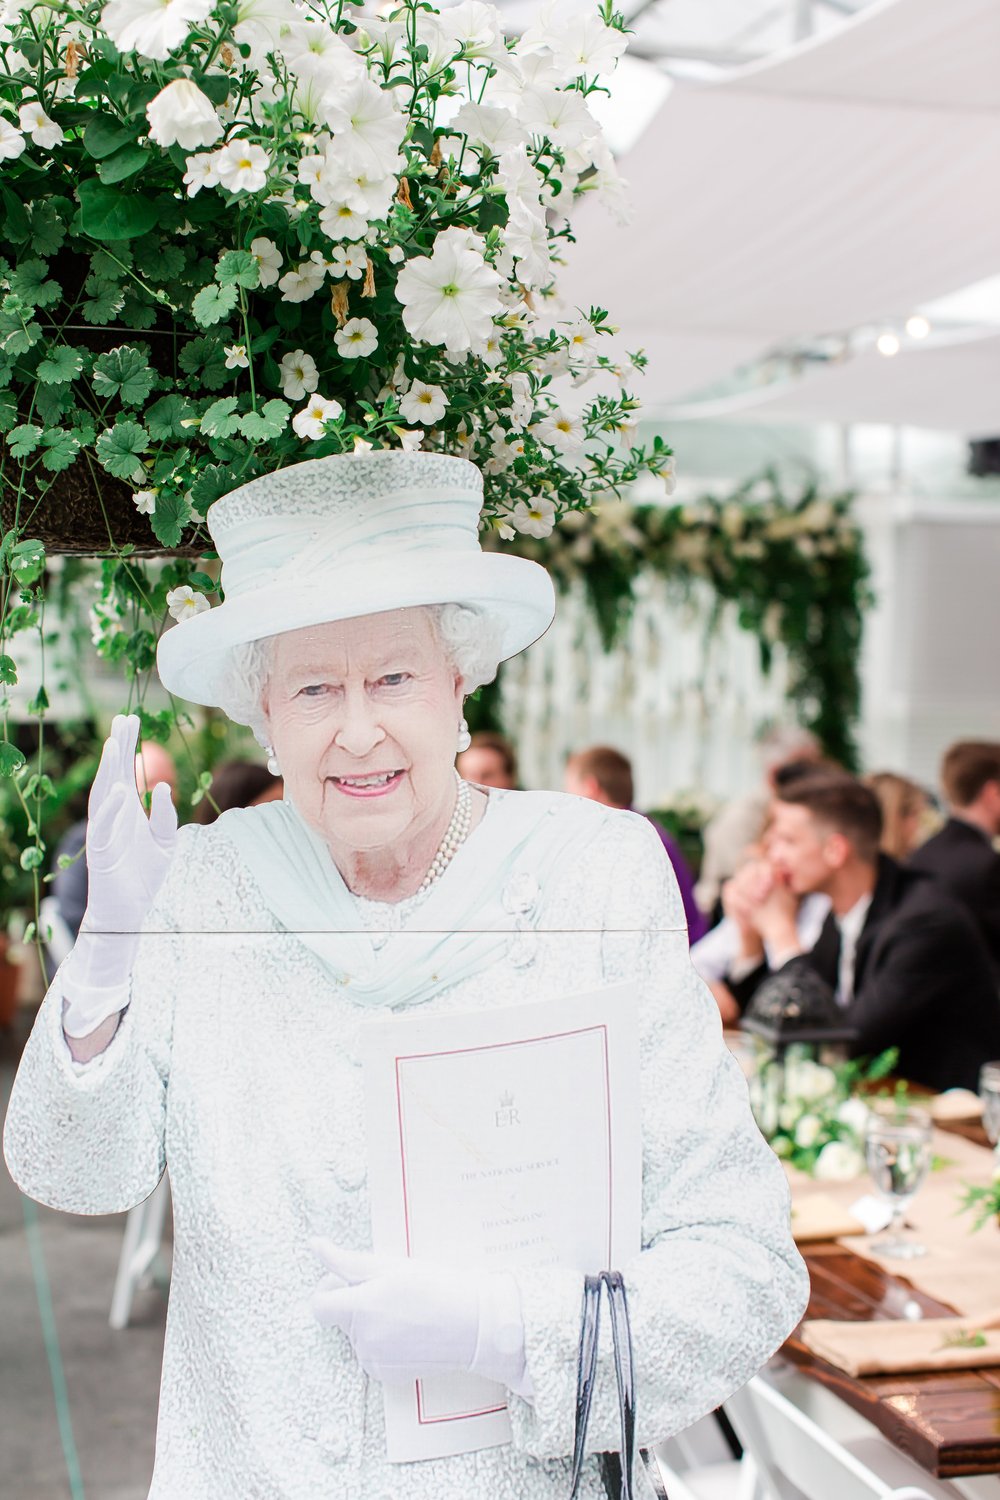  A cardboard cut out of Queen Elizabeth is posed with a wedding reception in the background 